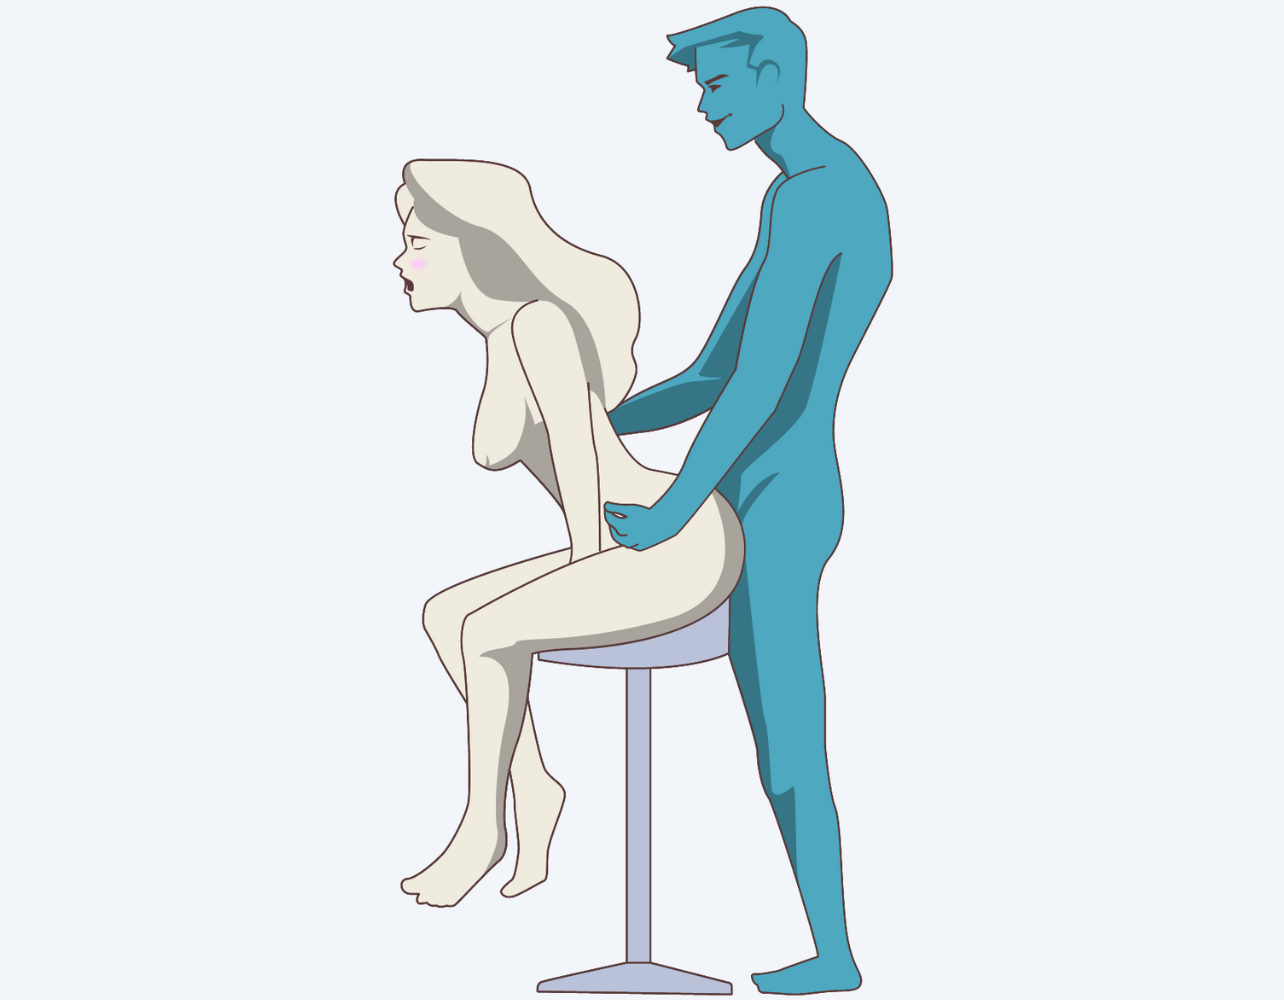 On a Highchair Anal Sex Position Illustration